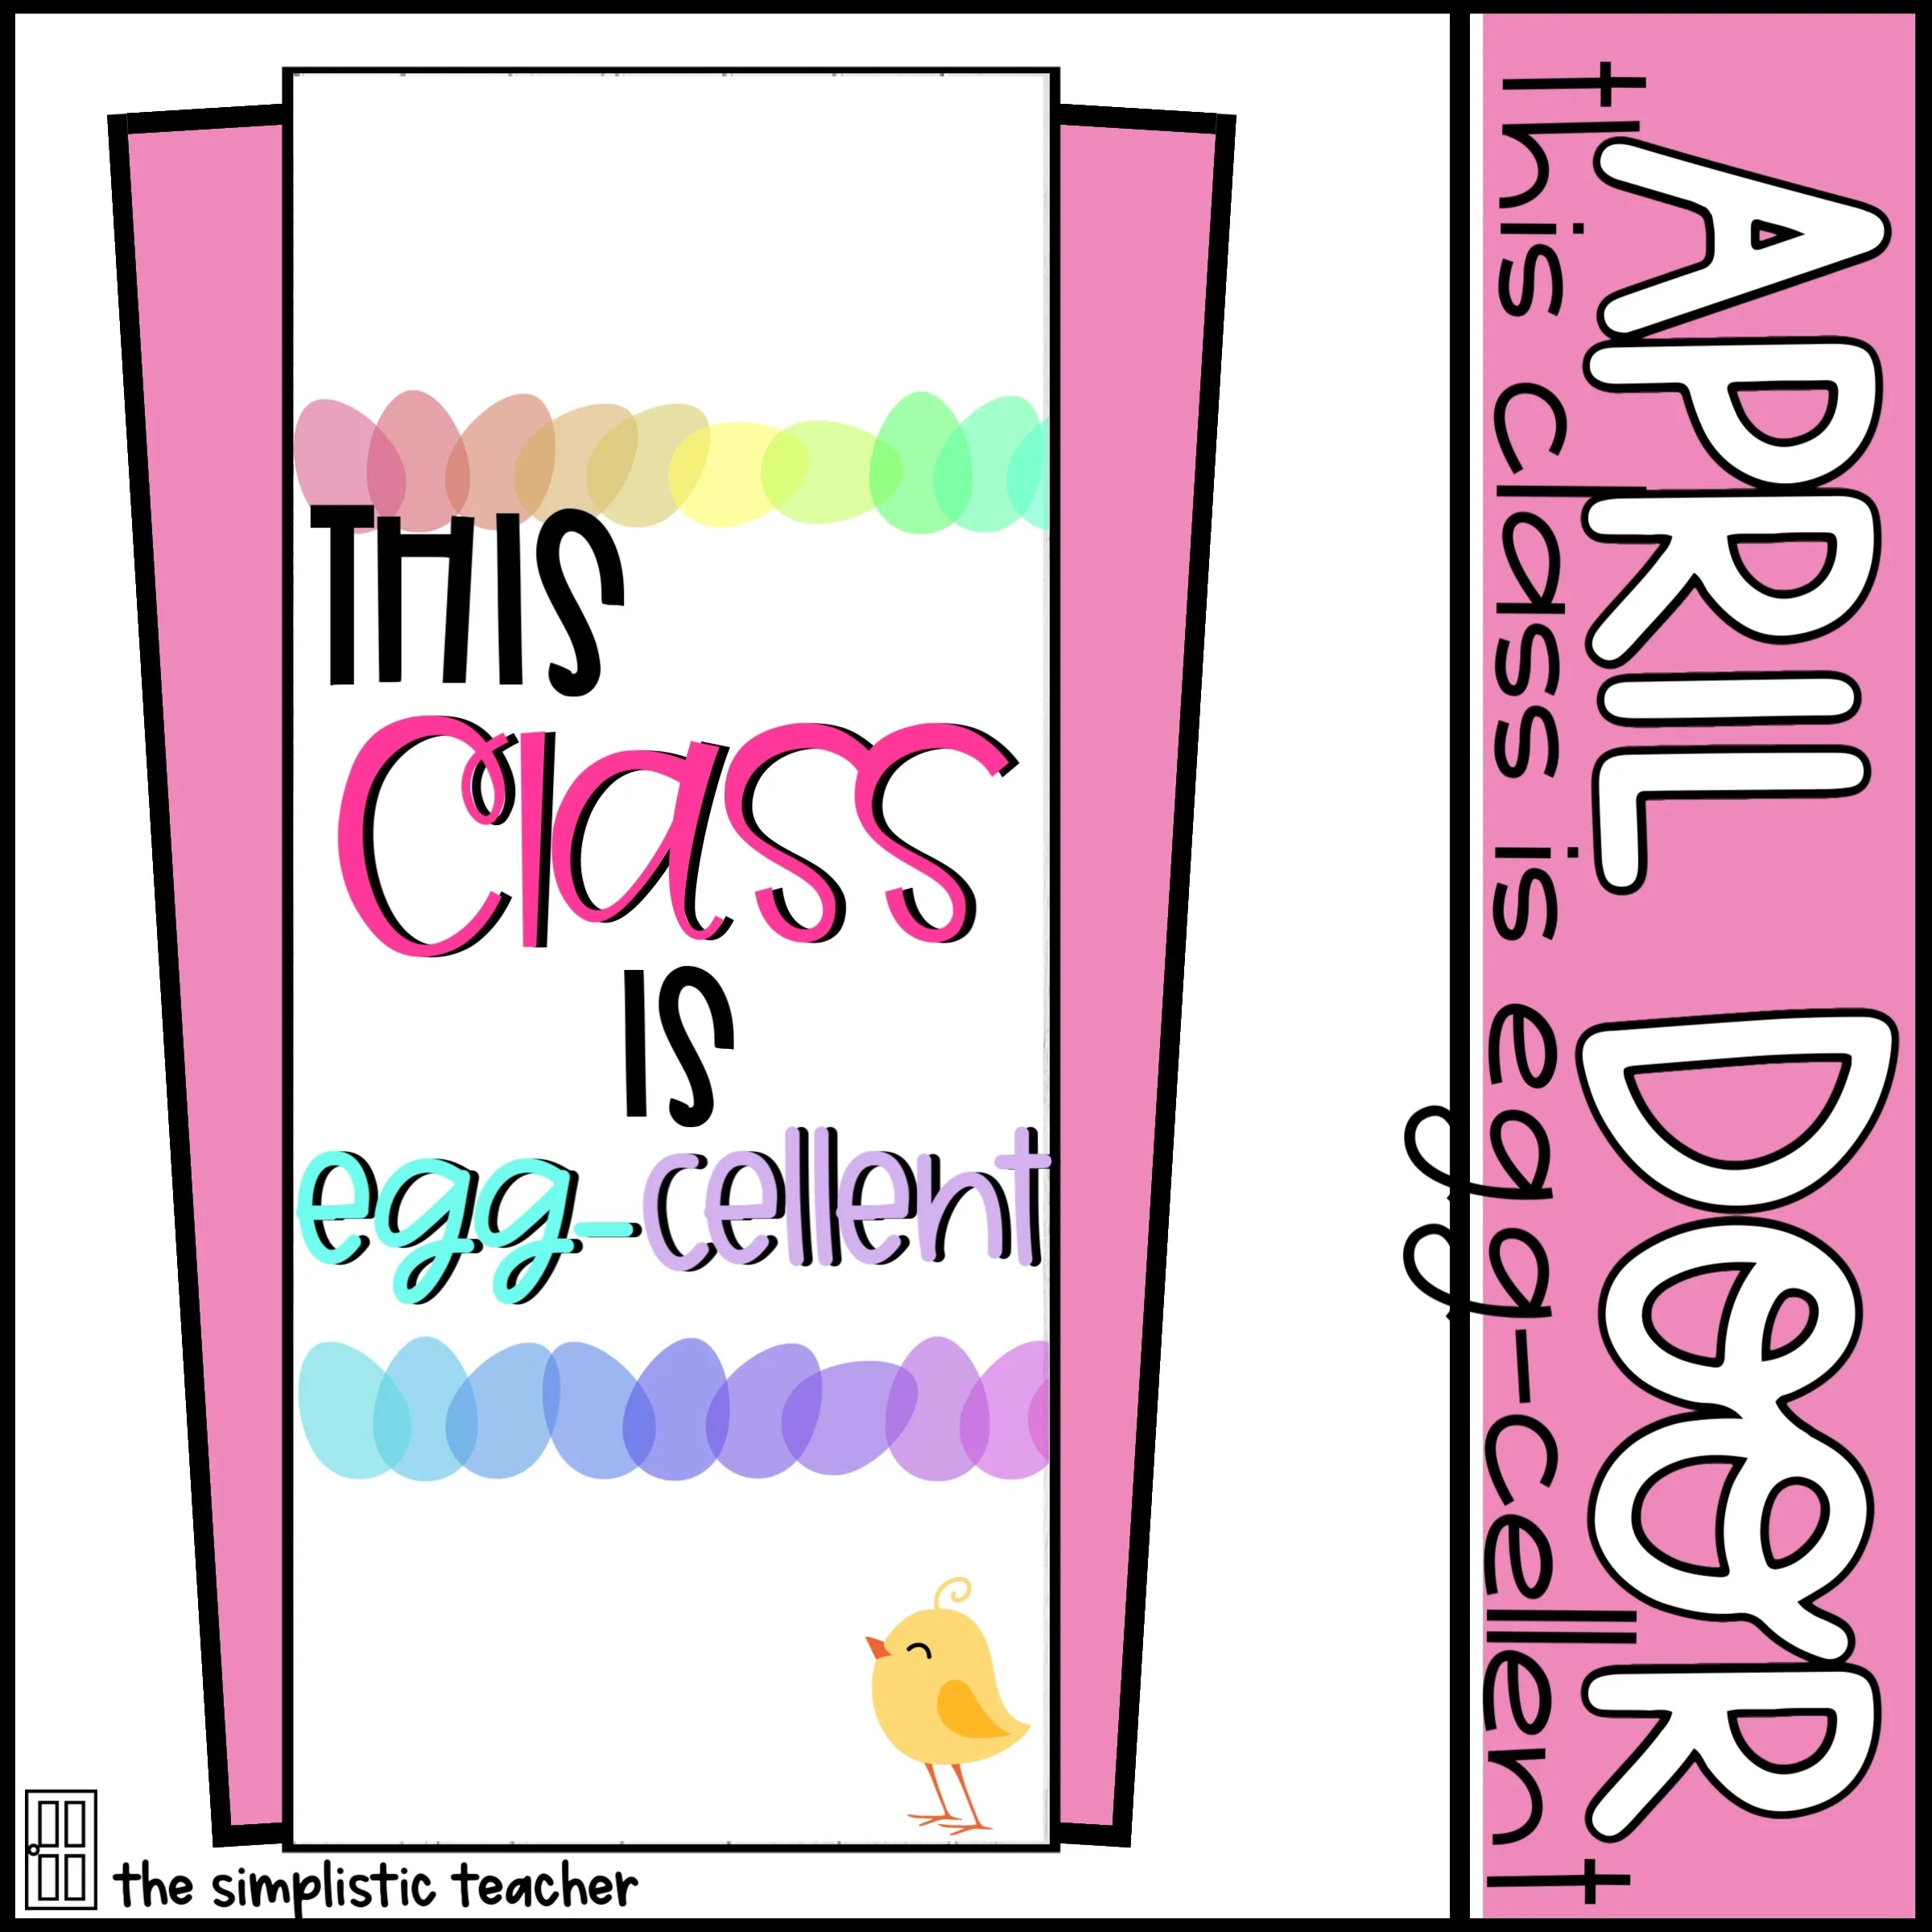 An educational teaching resource from The Simplistic Teacher entitled April Spring Door Set: This Class is Egg-Cellent downloadable at Teach Simple.